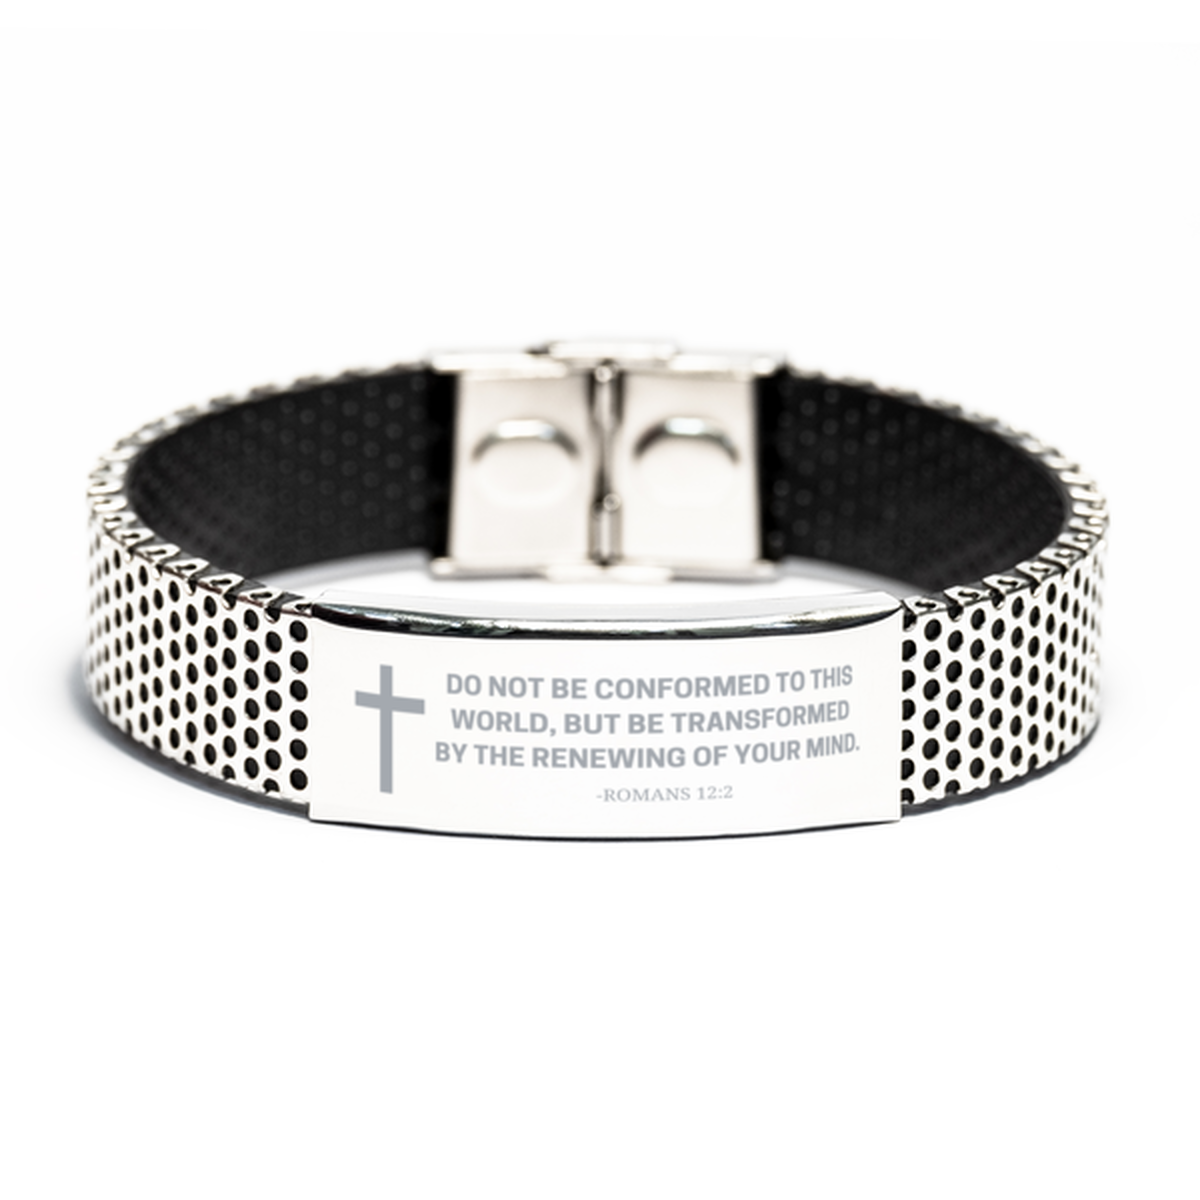 Baptism Gifts For Teenage Boys Girls, Christian Bible Verse Stainless Steel Bracelet, Do not be conformed to this world, Catholic Confirmation Gifts for Son, Godson, Grandson, Nephew